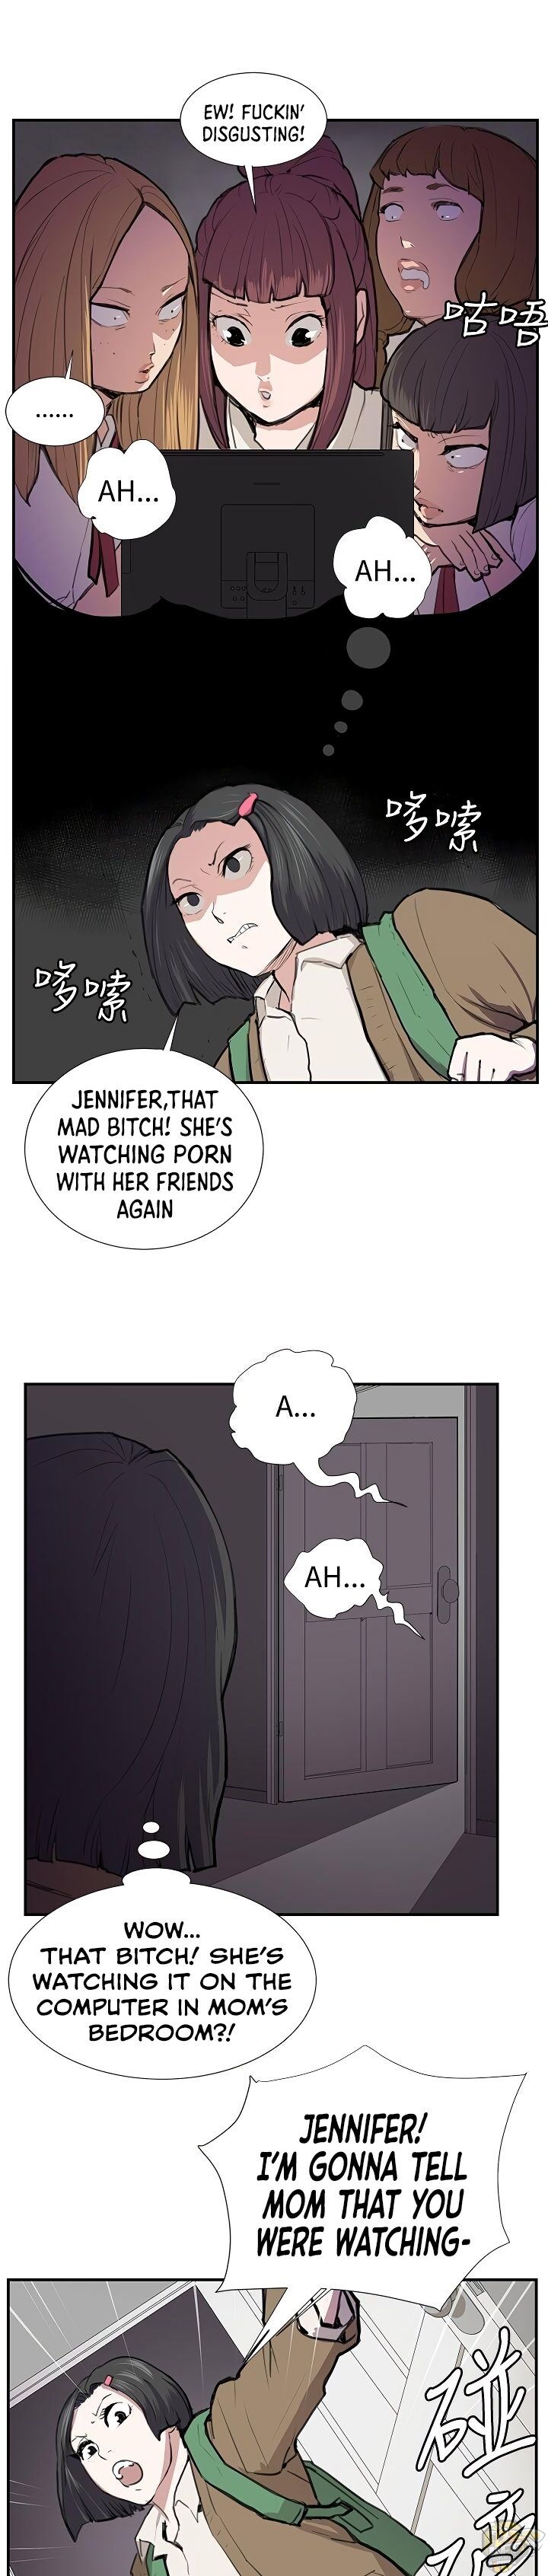 She’s too much for Me Chapter 52 - HolyManga.net